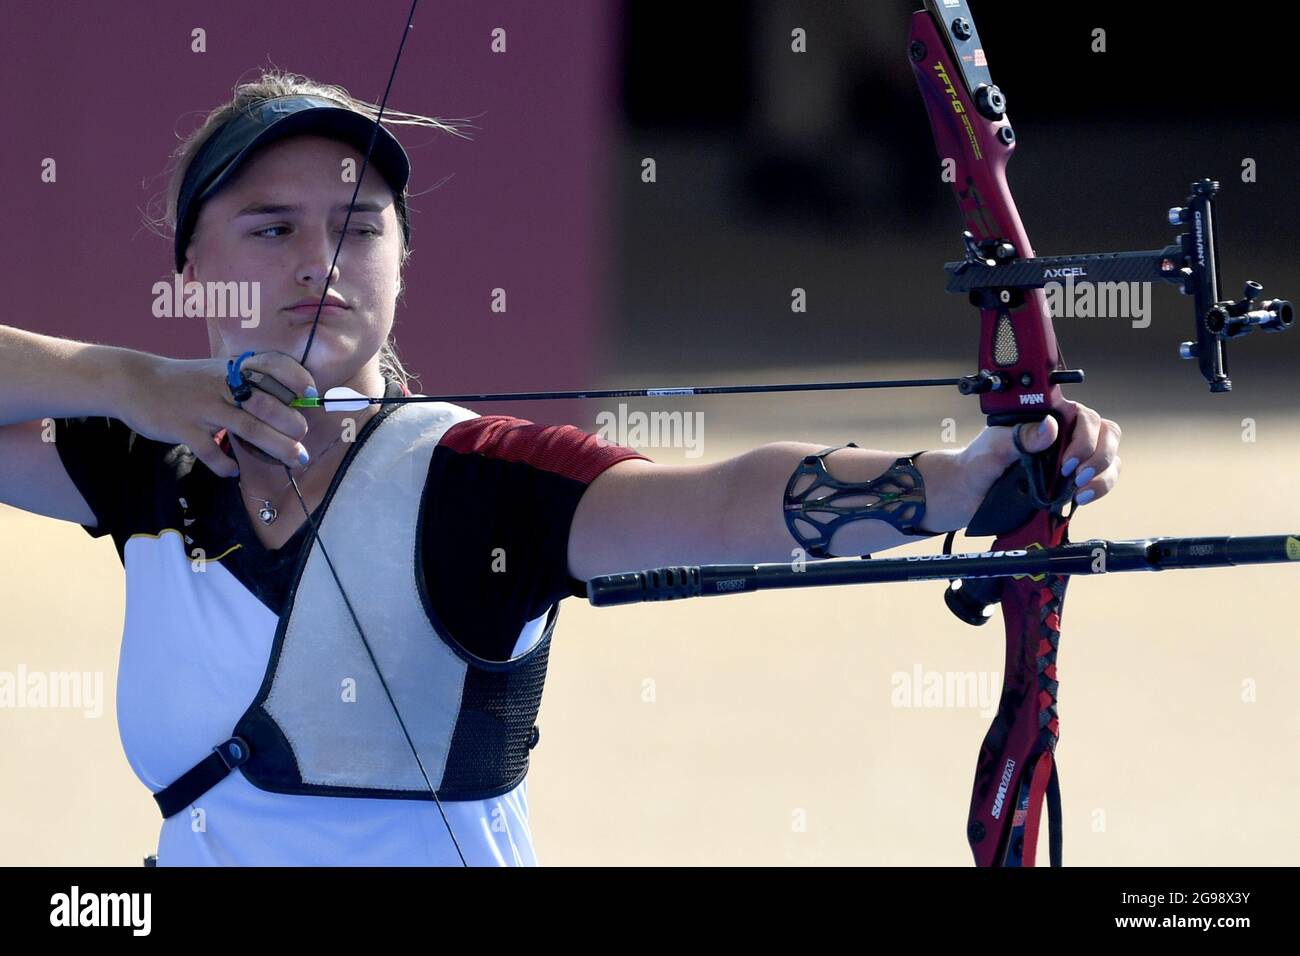 Tokio, Japan. 25th July, 2021. Archery: Olympics, Olympic Archery, Team, Women, Semifinals : Rus. Oly. Committee (Russian Olympic Committee) - Germany at Yumenoshima Park Archery Field. Charline Schwarz from Germany in action. Credit: Swen Pförtner/dpa/Alamy Live News Stock Photo